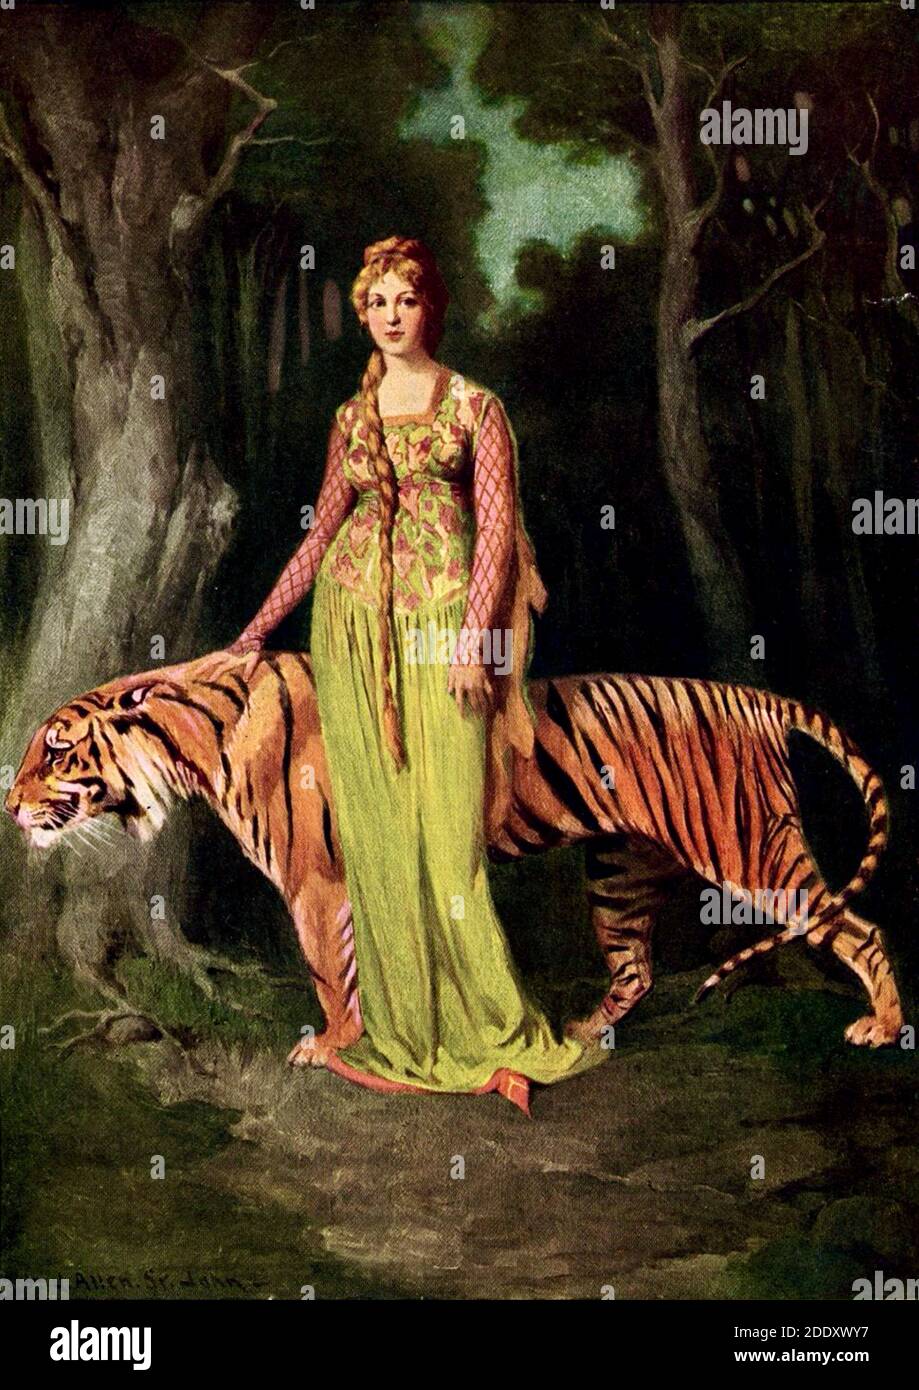 Image taken from the book 'Face in the Pool, written and illustrated by James Allen St John. The woman pictured is the Princess Astrella with a tiger. Stock Photo